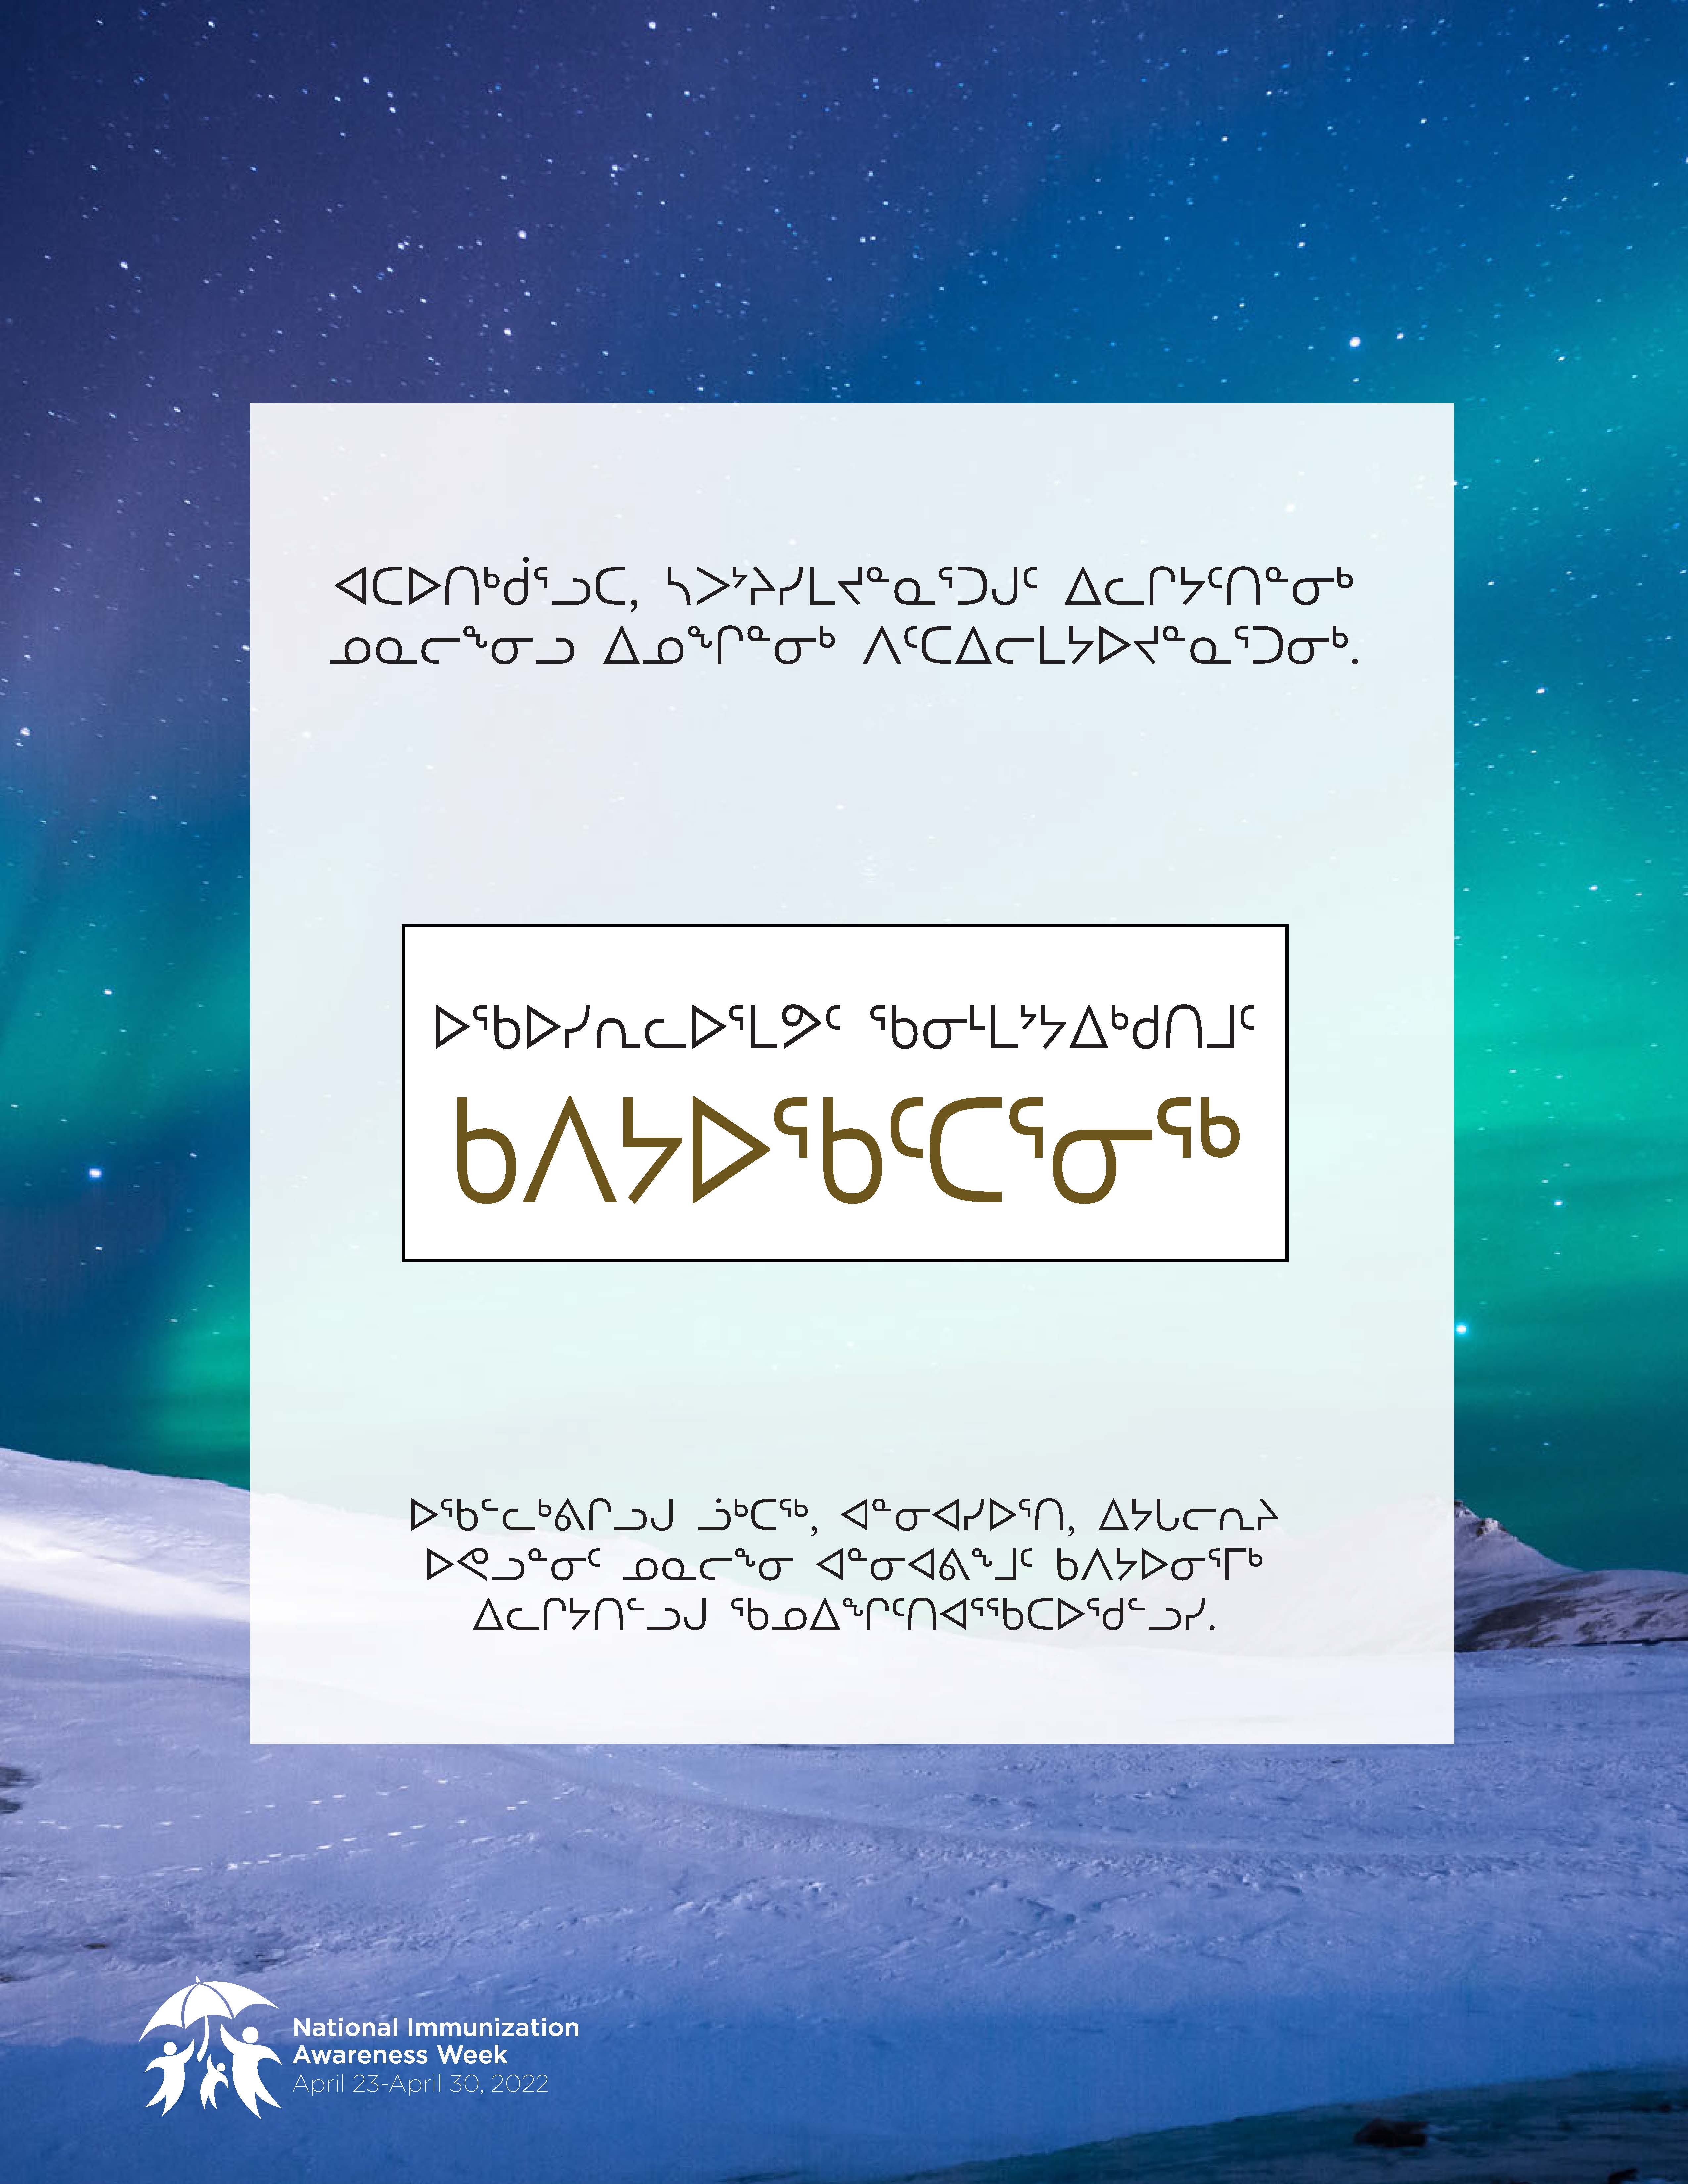 Let's talk about vaccines (Inuktitut - North Baffin)